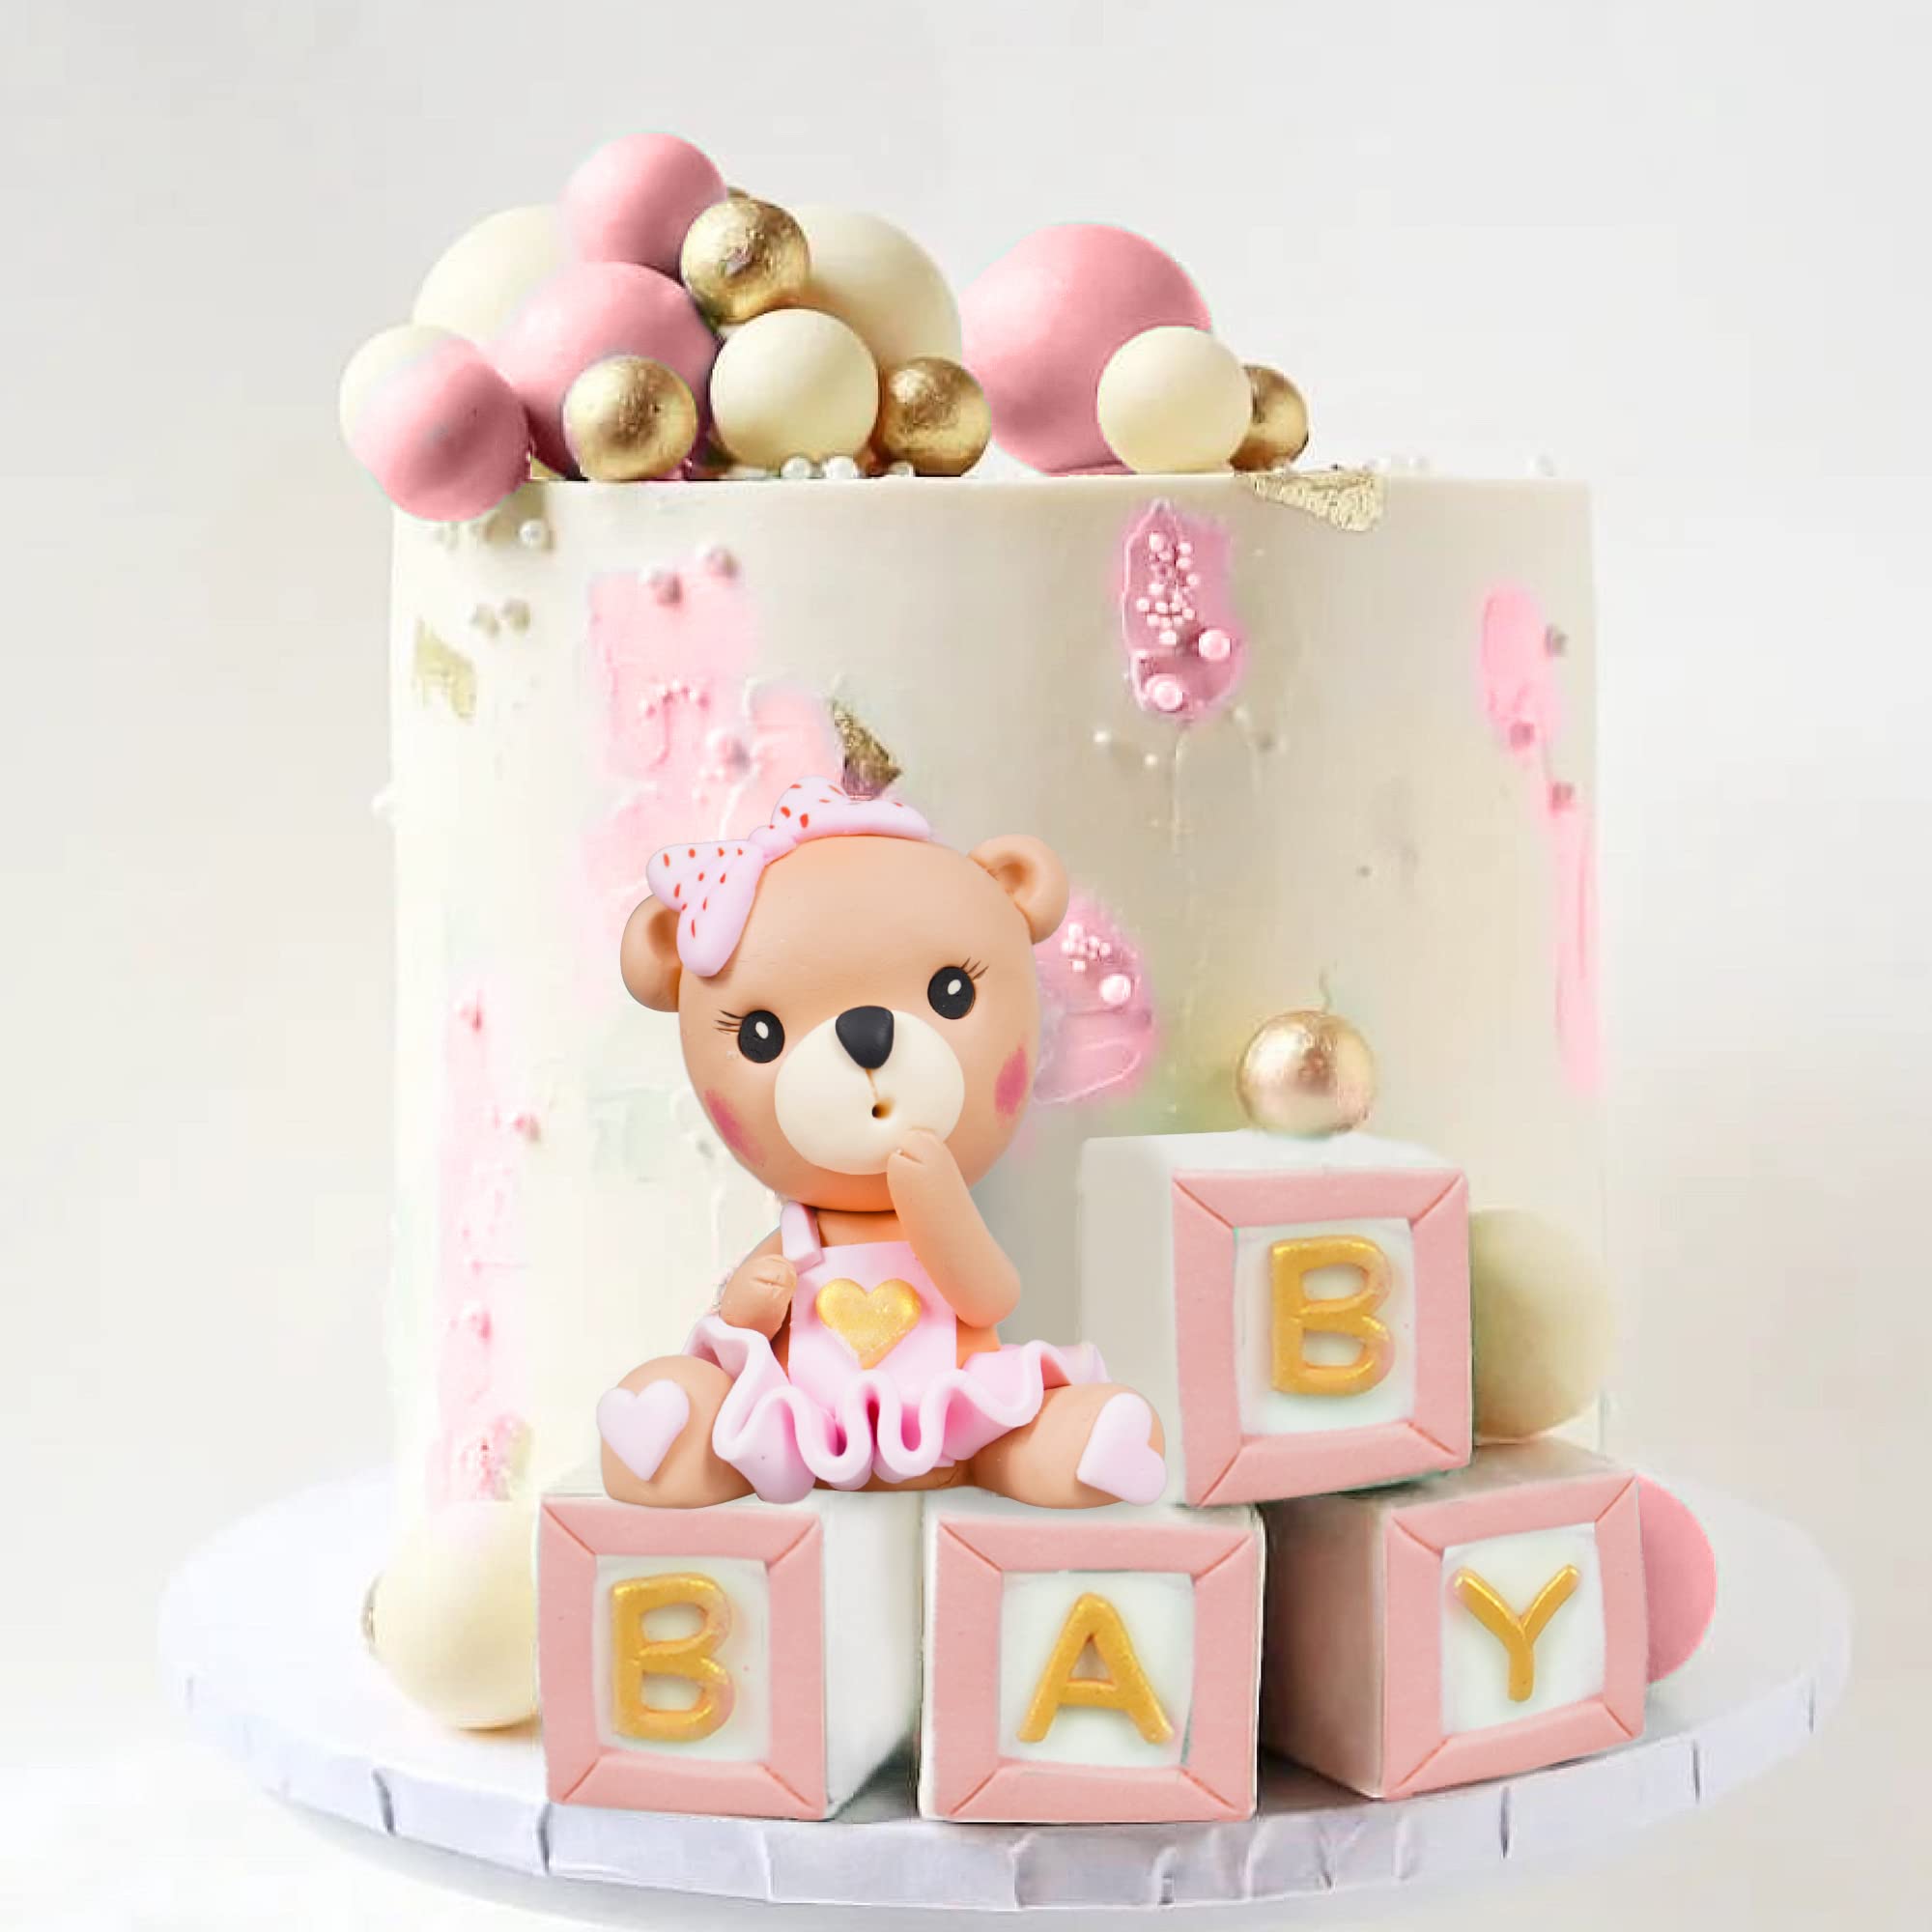 Bear Cake Toppers Mini Bear Cake Decorations Pink BABY Letter Cake Toppers Gold Pink White Pearl Ball For Baby Shower Girl Birthday Party Teddy Bear Theme Party Supplies (Pink Baby)